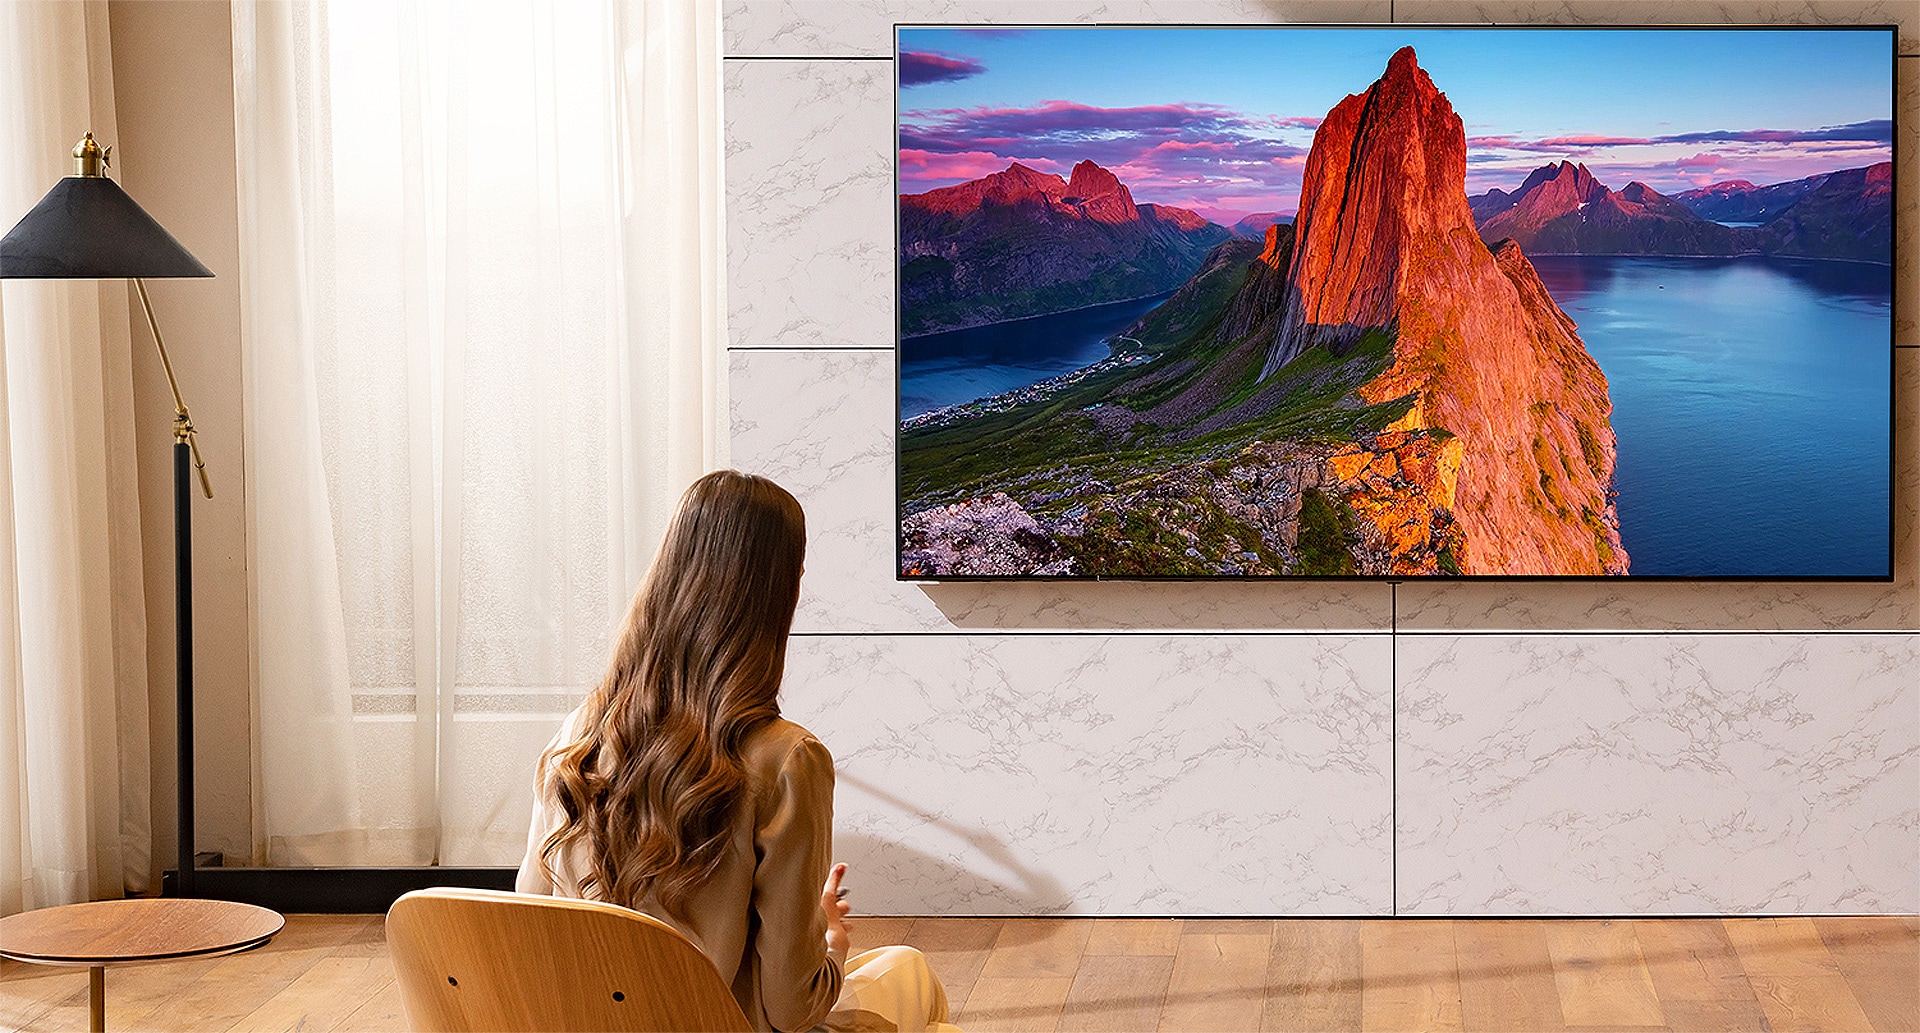 A woman is watching TV in the living room. Landscape scenery is on the screen.